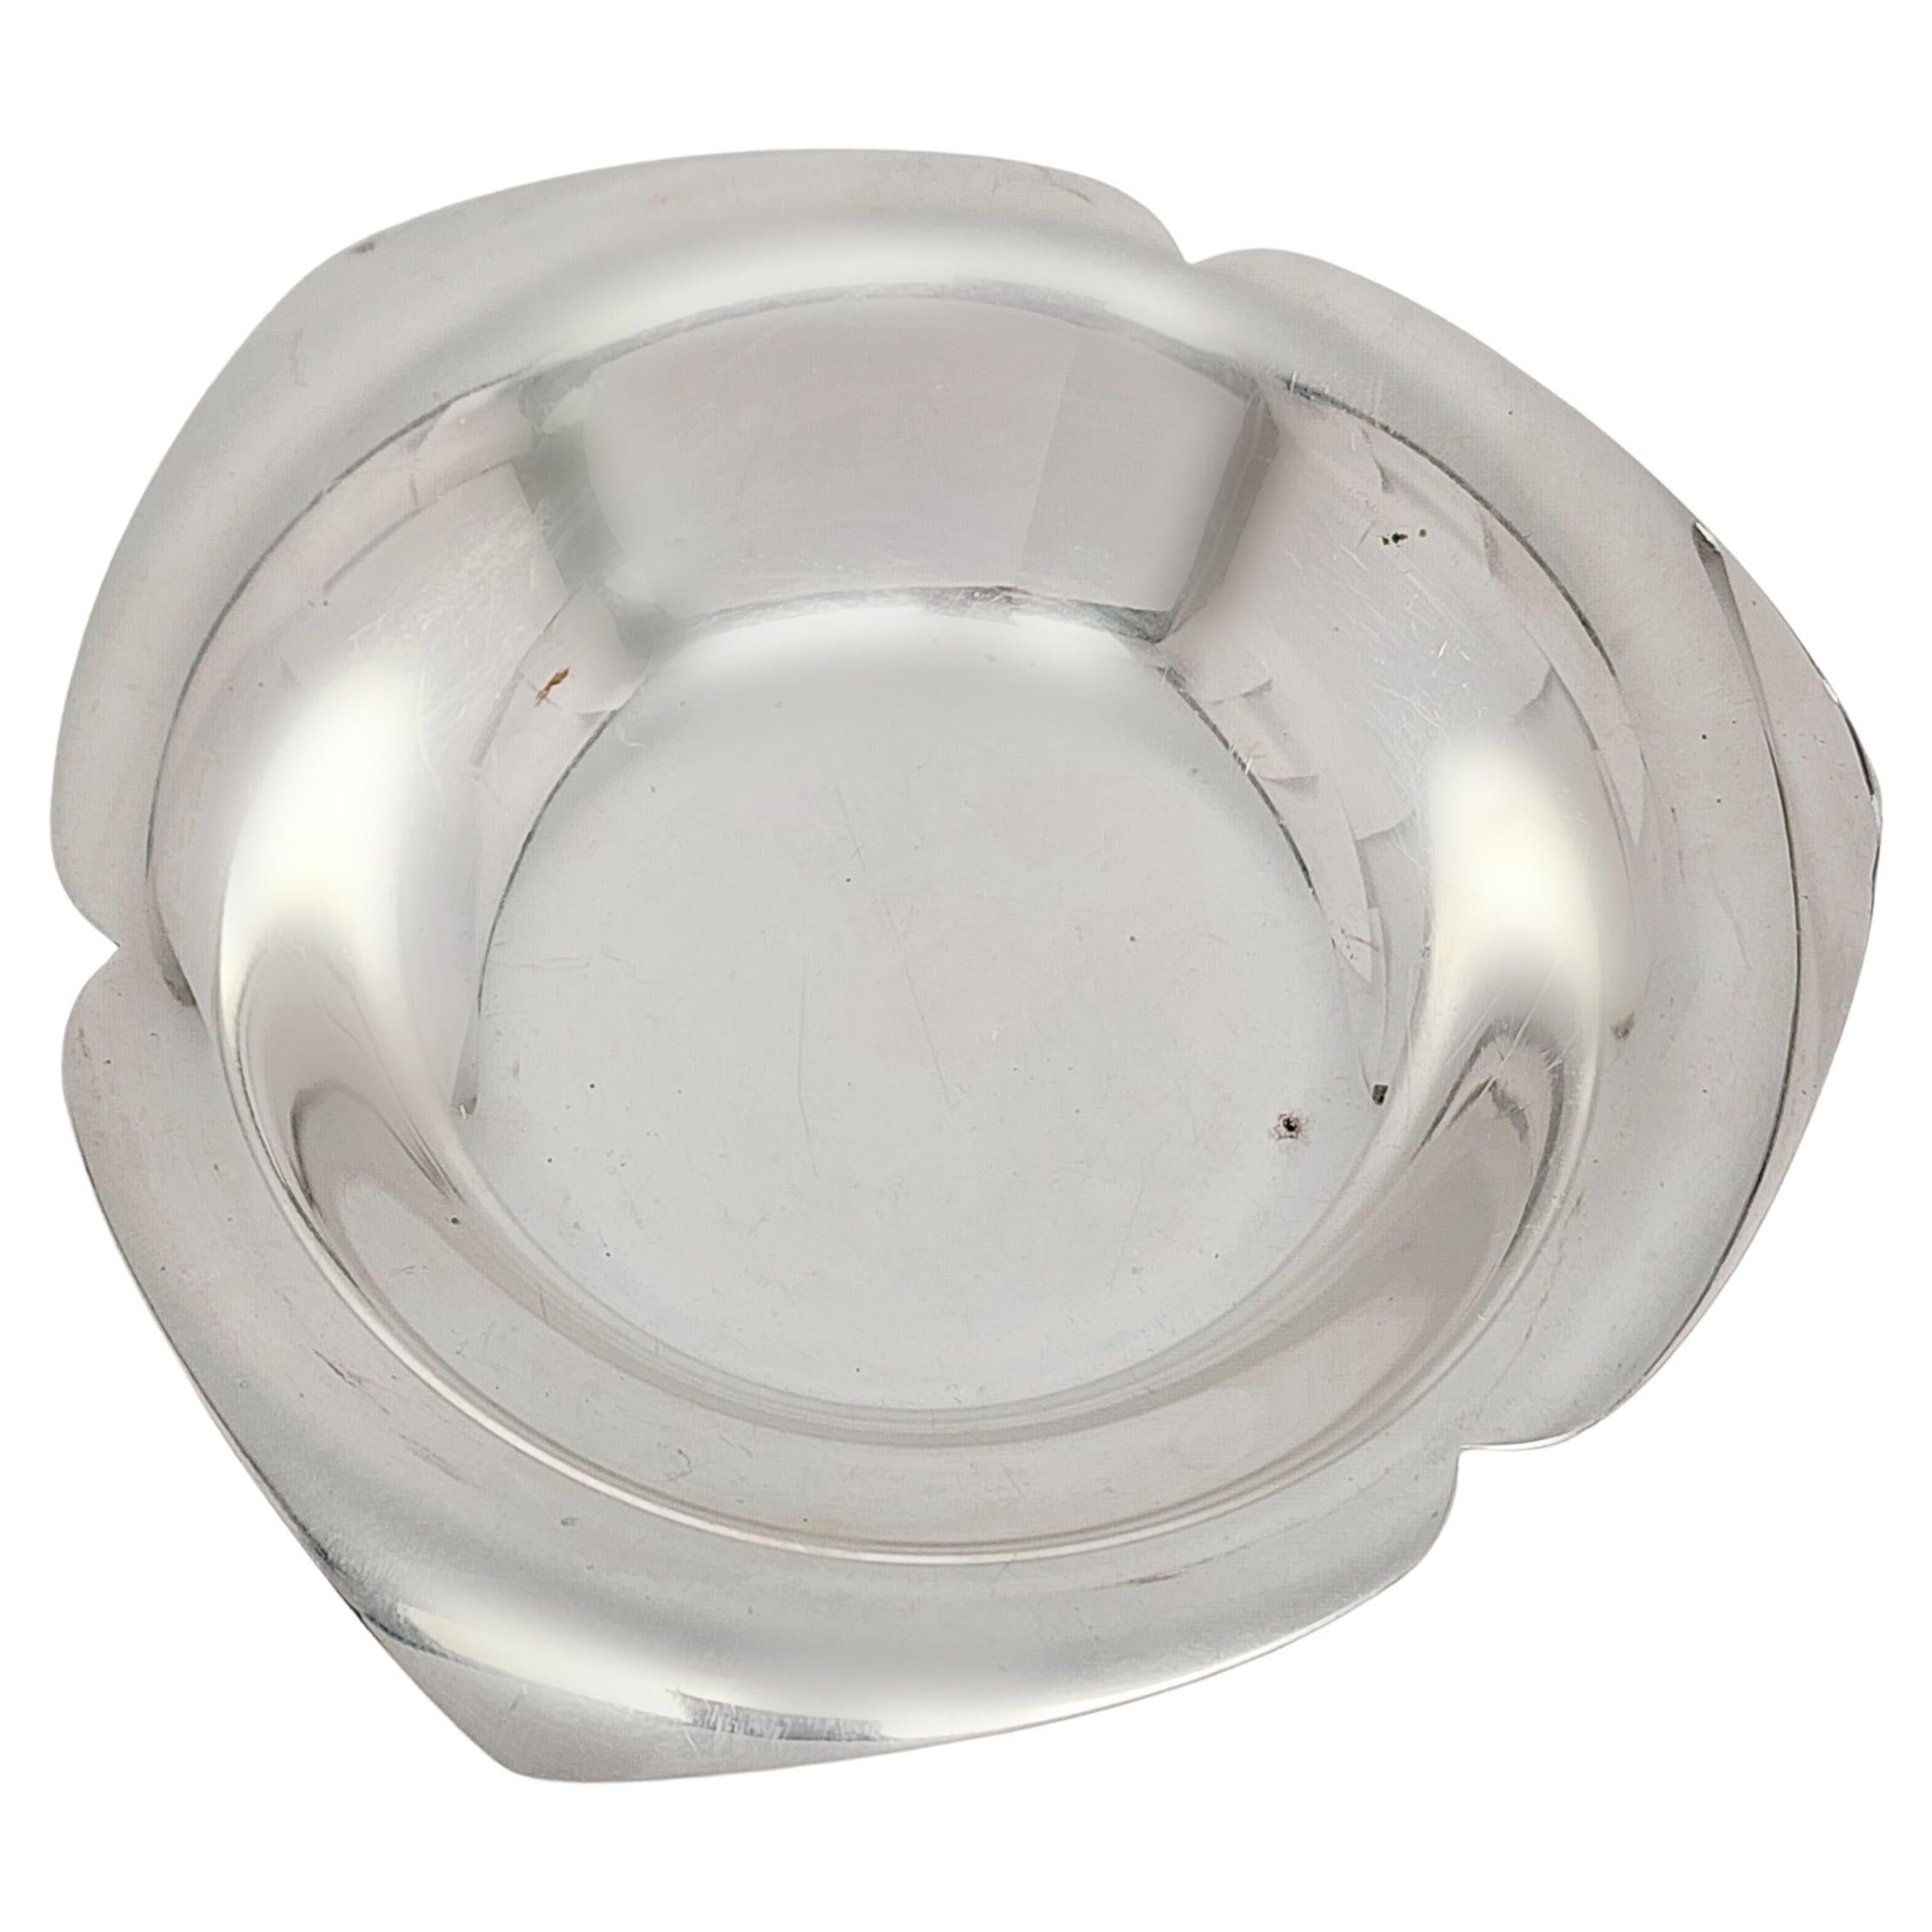 Tiffany & Co. Sterling Silver Flower Small Nut Bowl/Dish 23434